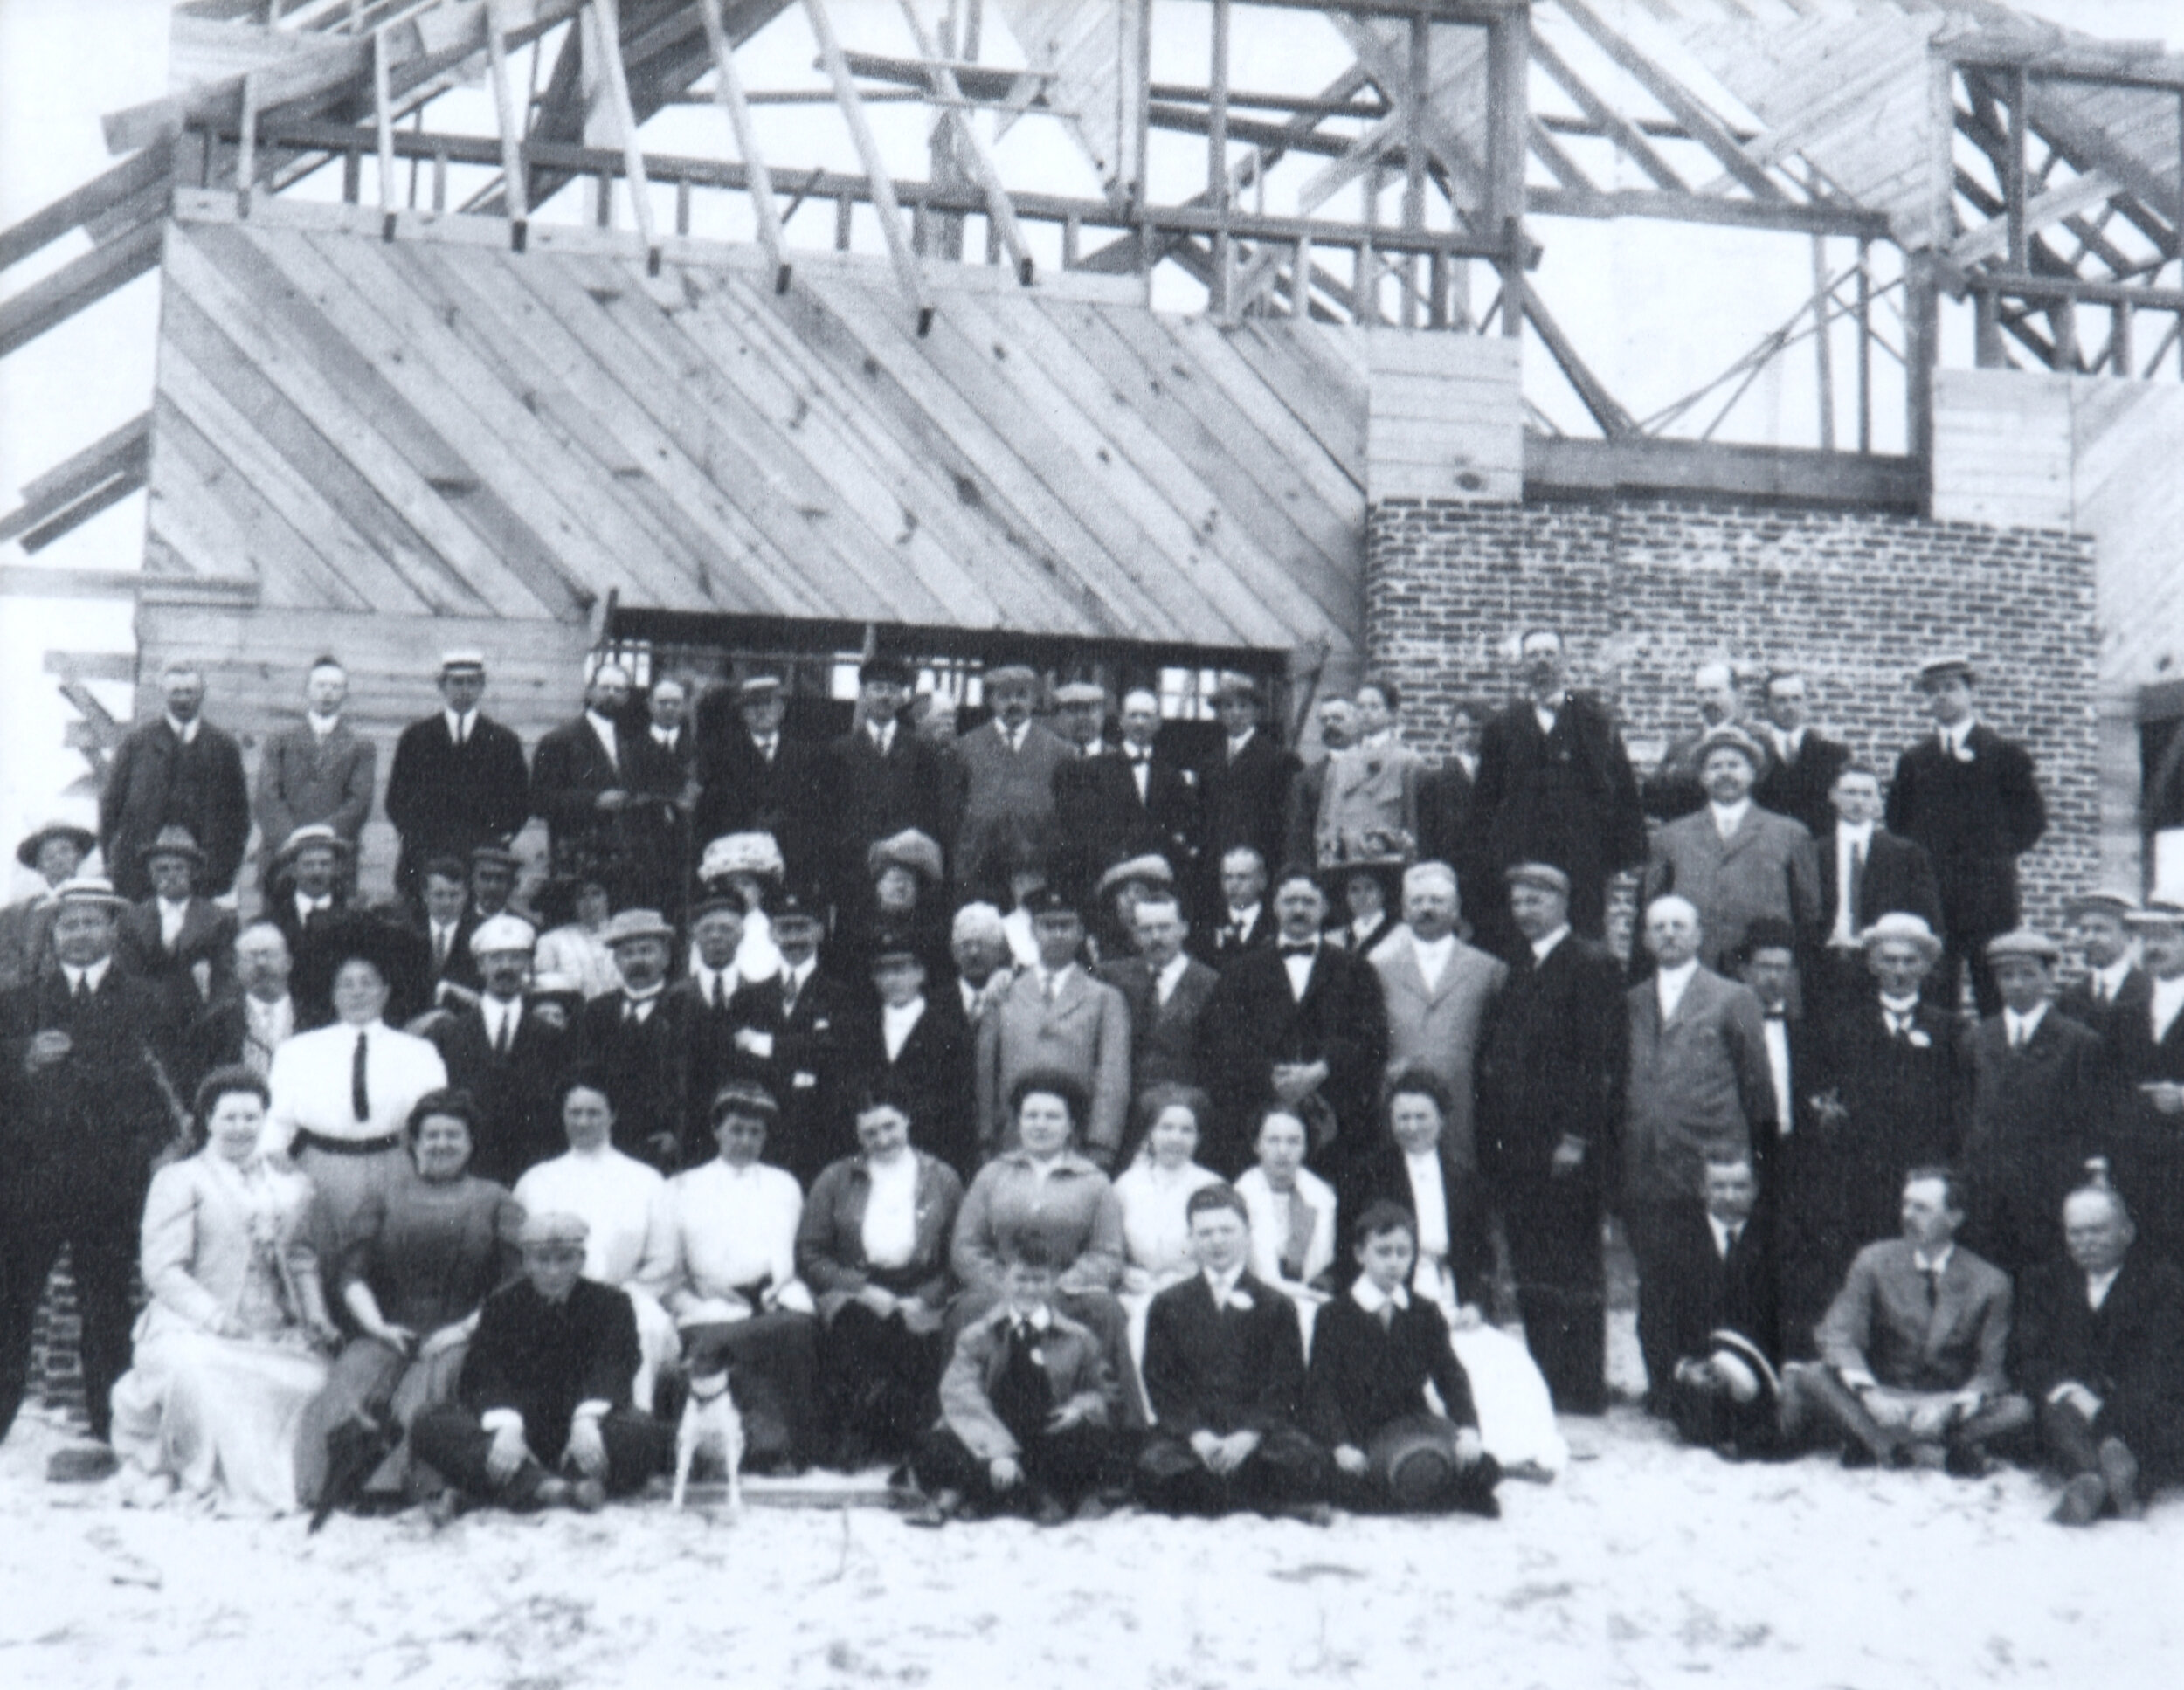 Members in front of the club building while it is under construction, circa 1911.